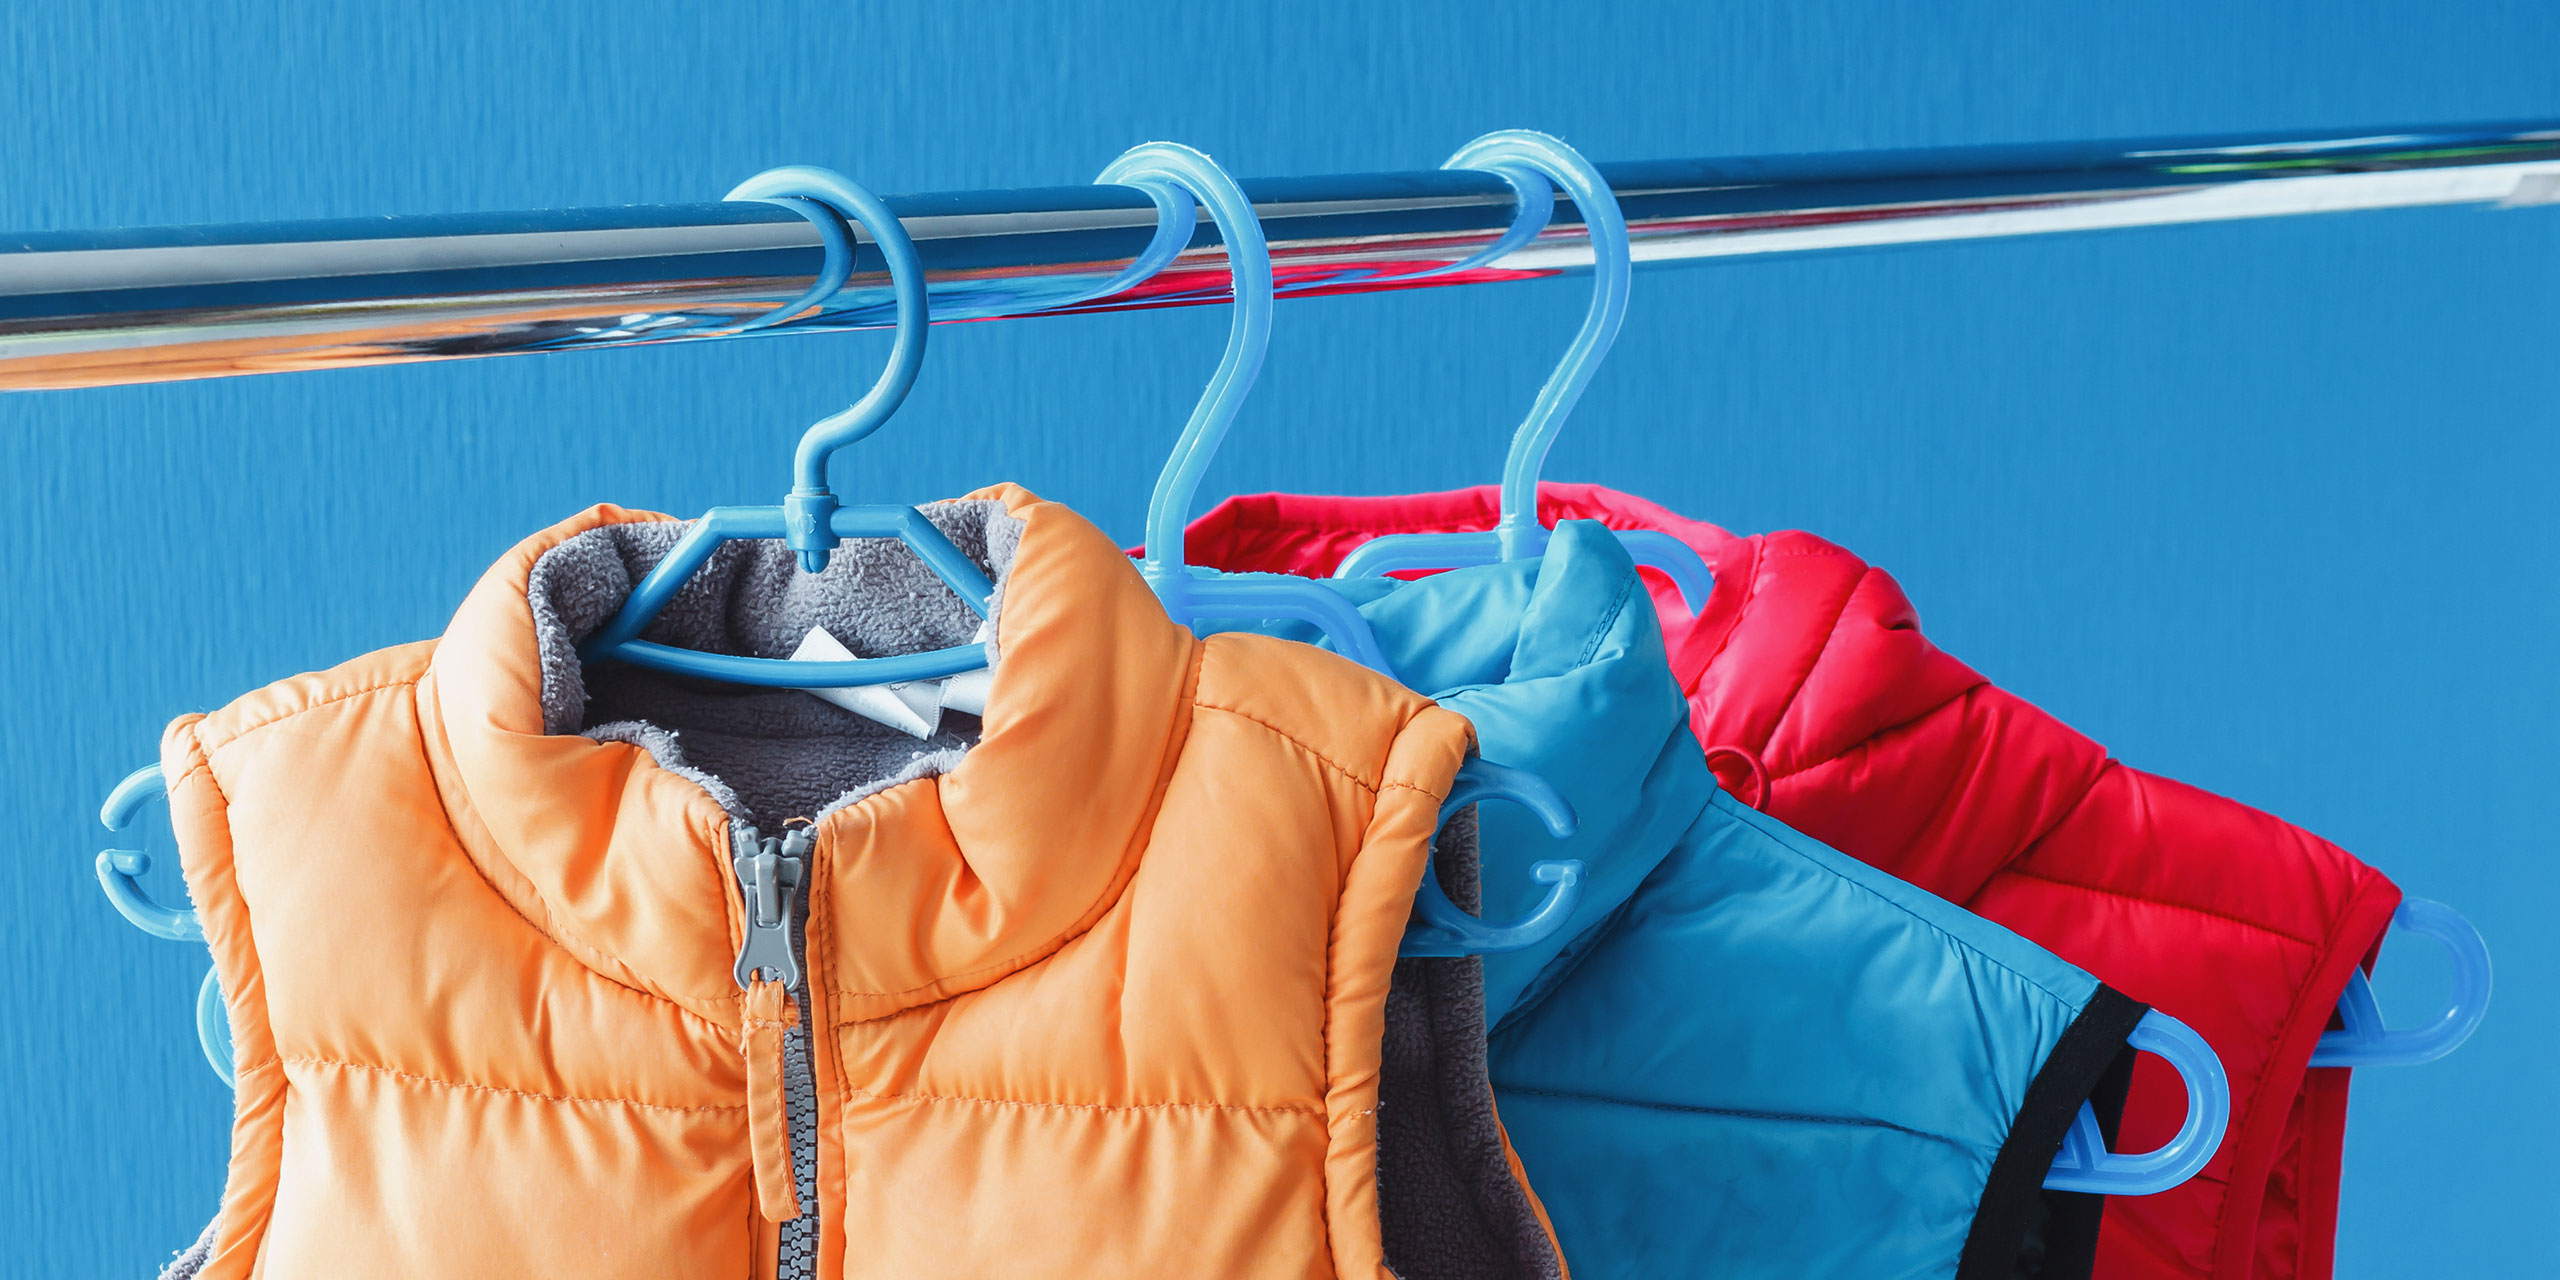 Winter Vests Hanging in a Closet; Courtesy of PicMy/Shutterstock